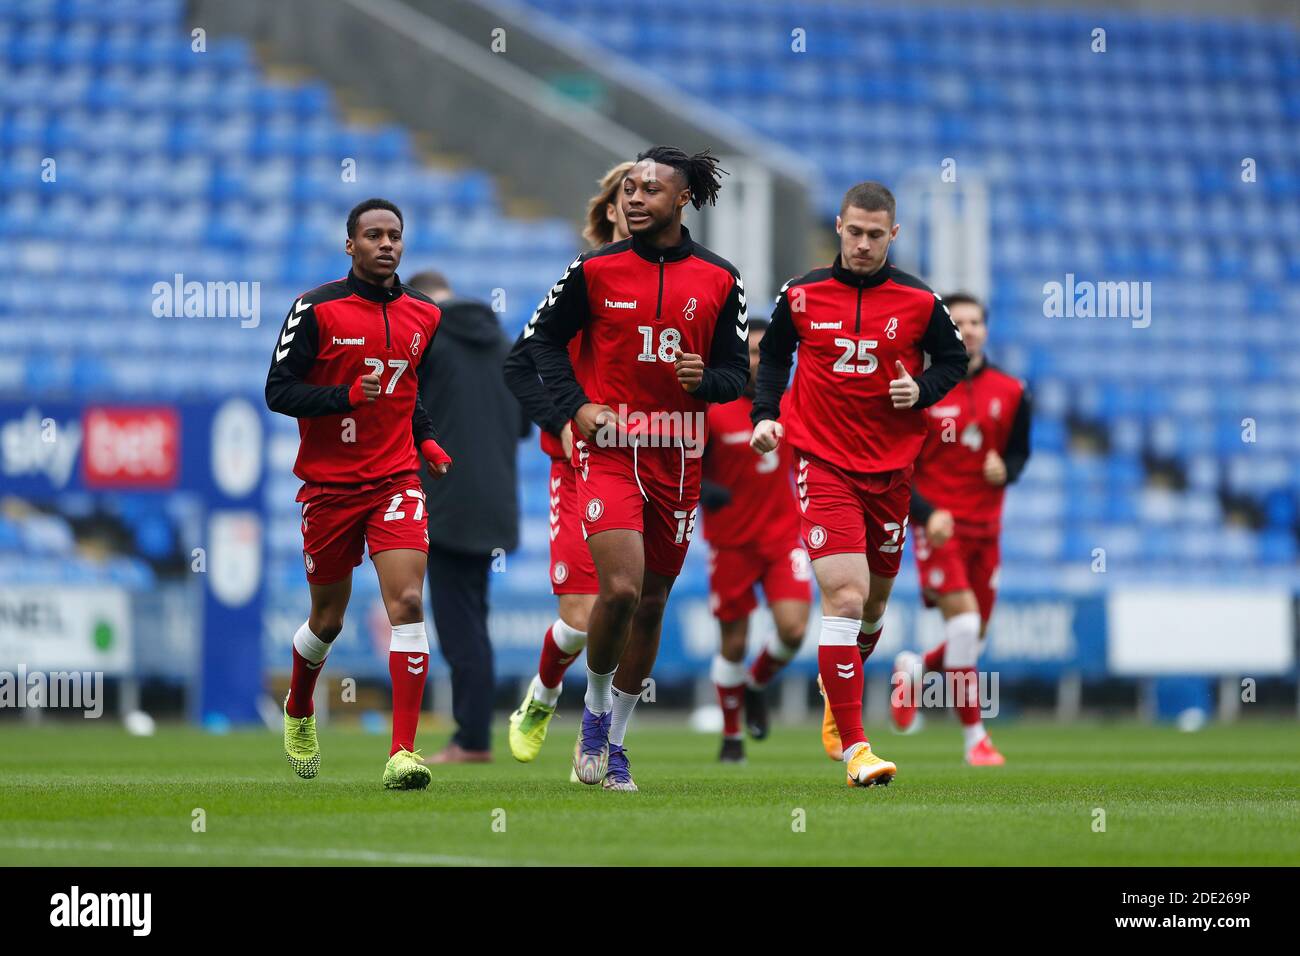 Madejski Stadium, Reading, Berkshire, UK. 28th Nov, 2020. English Football League Championship Football, Reading versus Bristol City; Antoine Semenyo of Bristol City running out onto the pitch before kick off followed by Opi Edwards and Tommy Rowe of Bristol City Credit: Action Plus Sports/Alamy Live News Stock Photo